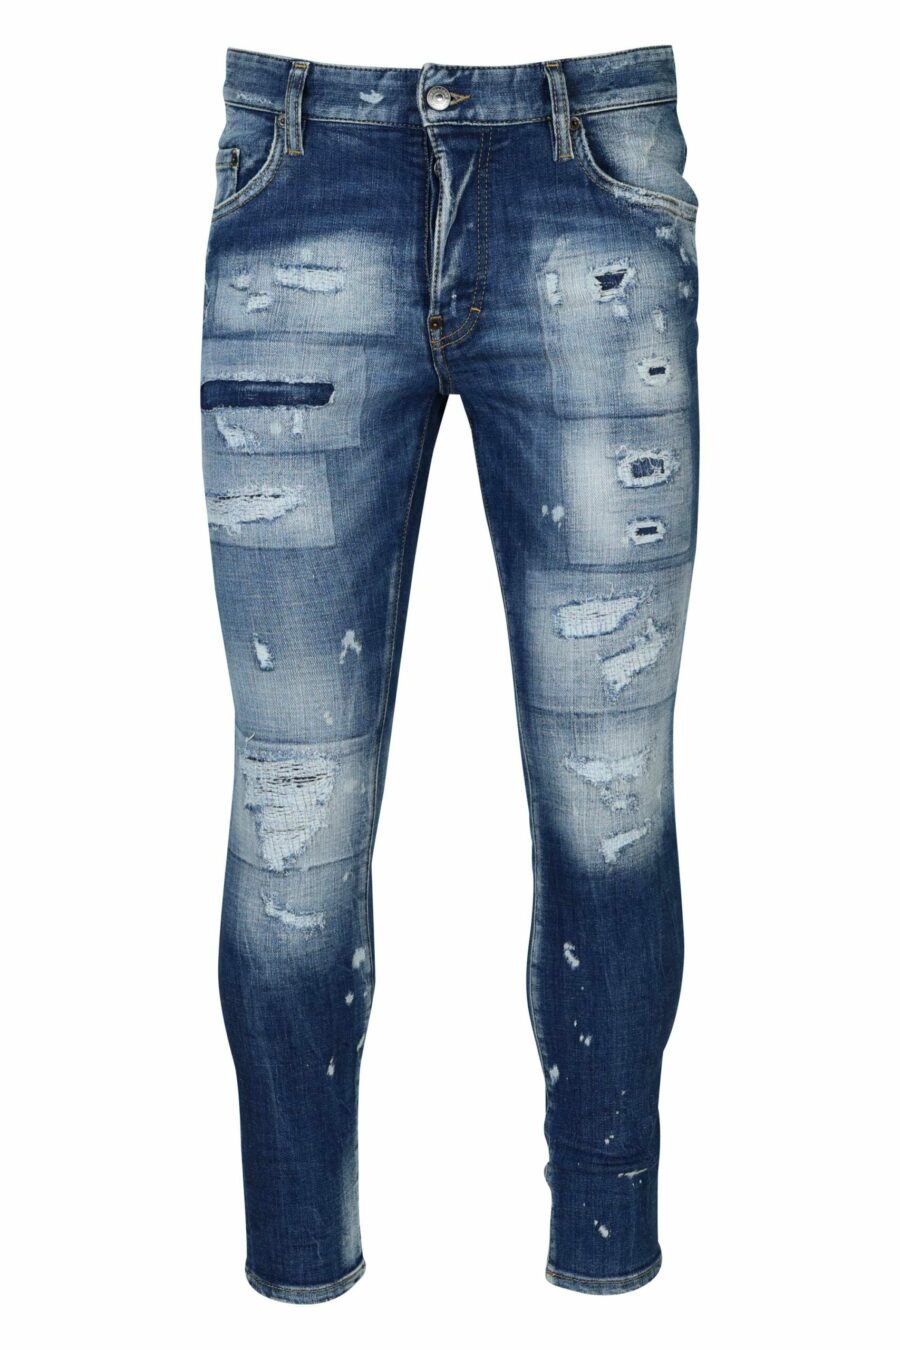 Blue "super twinky jean" jeans with rips - 8054148339029 scaled